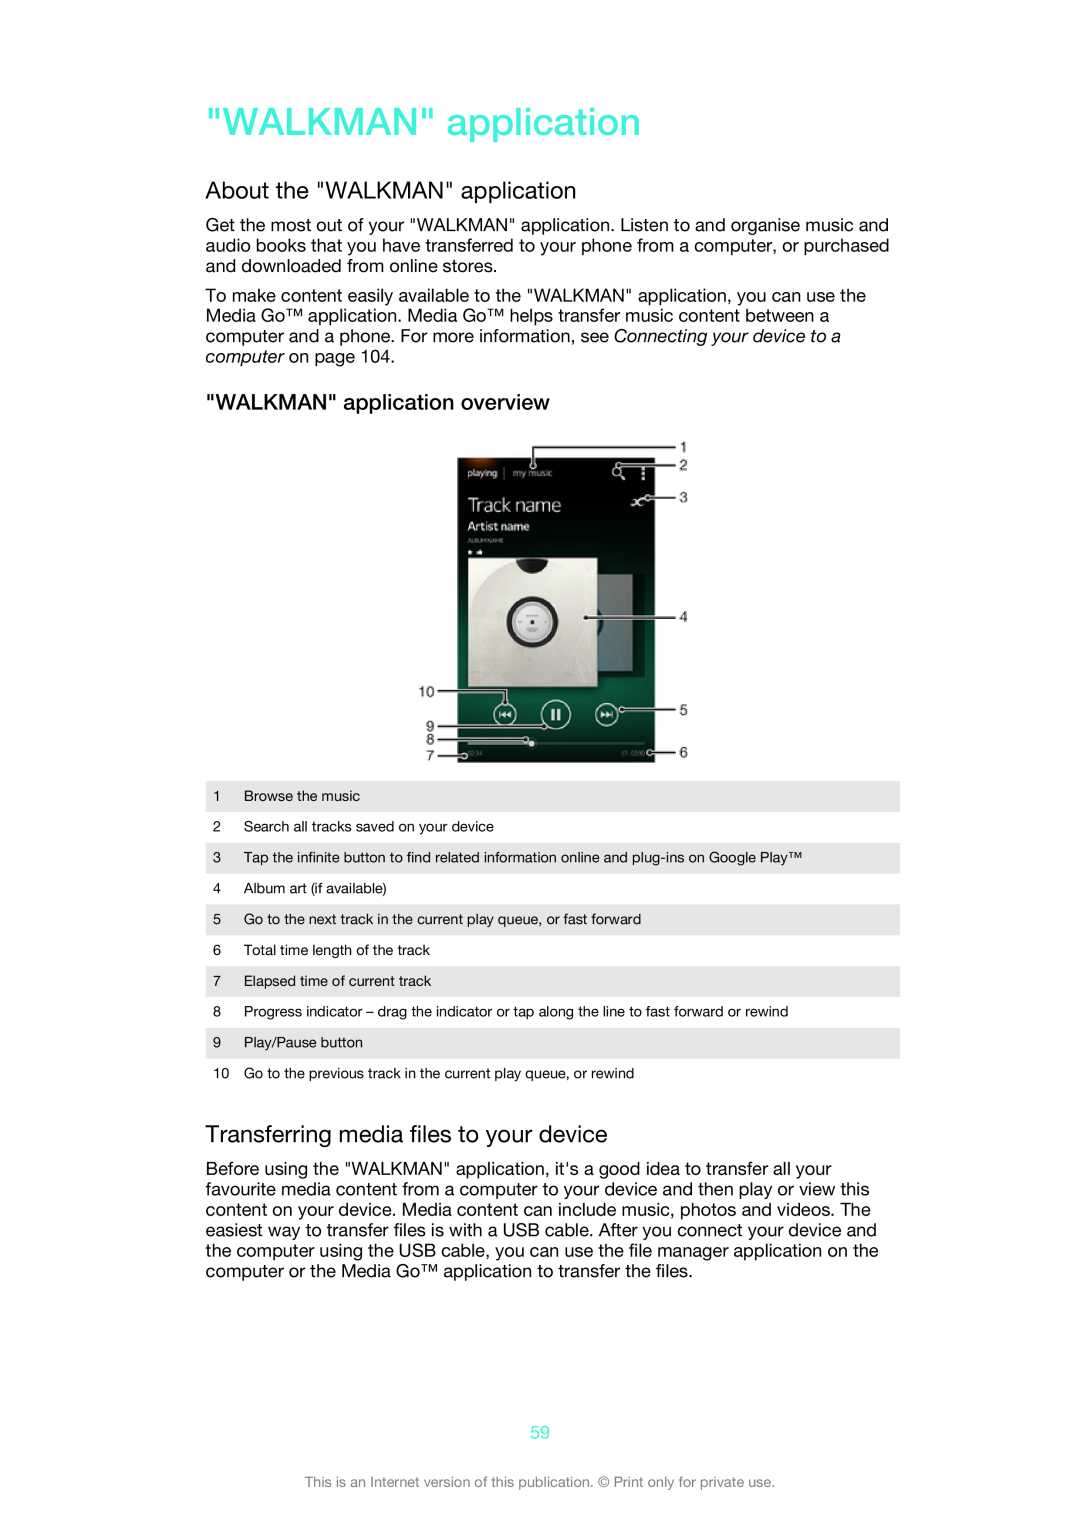 Sony 1270-6441 About the WALKMAN application, Transferring media files to your device, WALKMAN application overview 